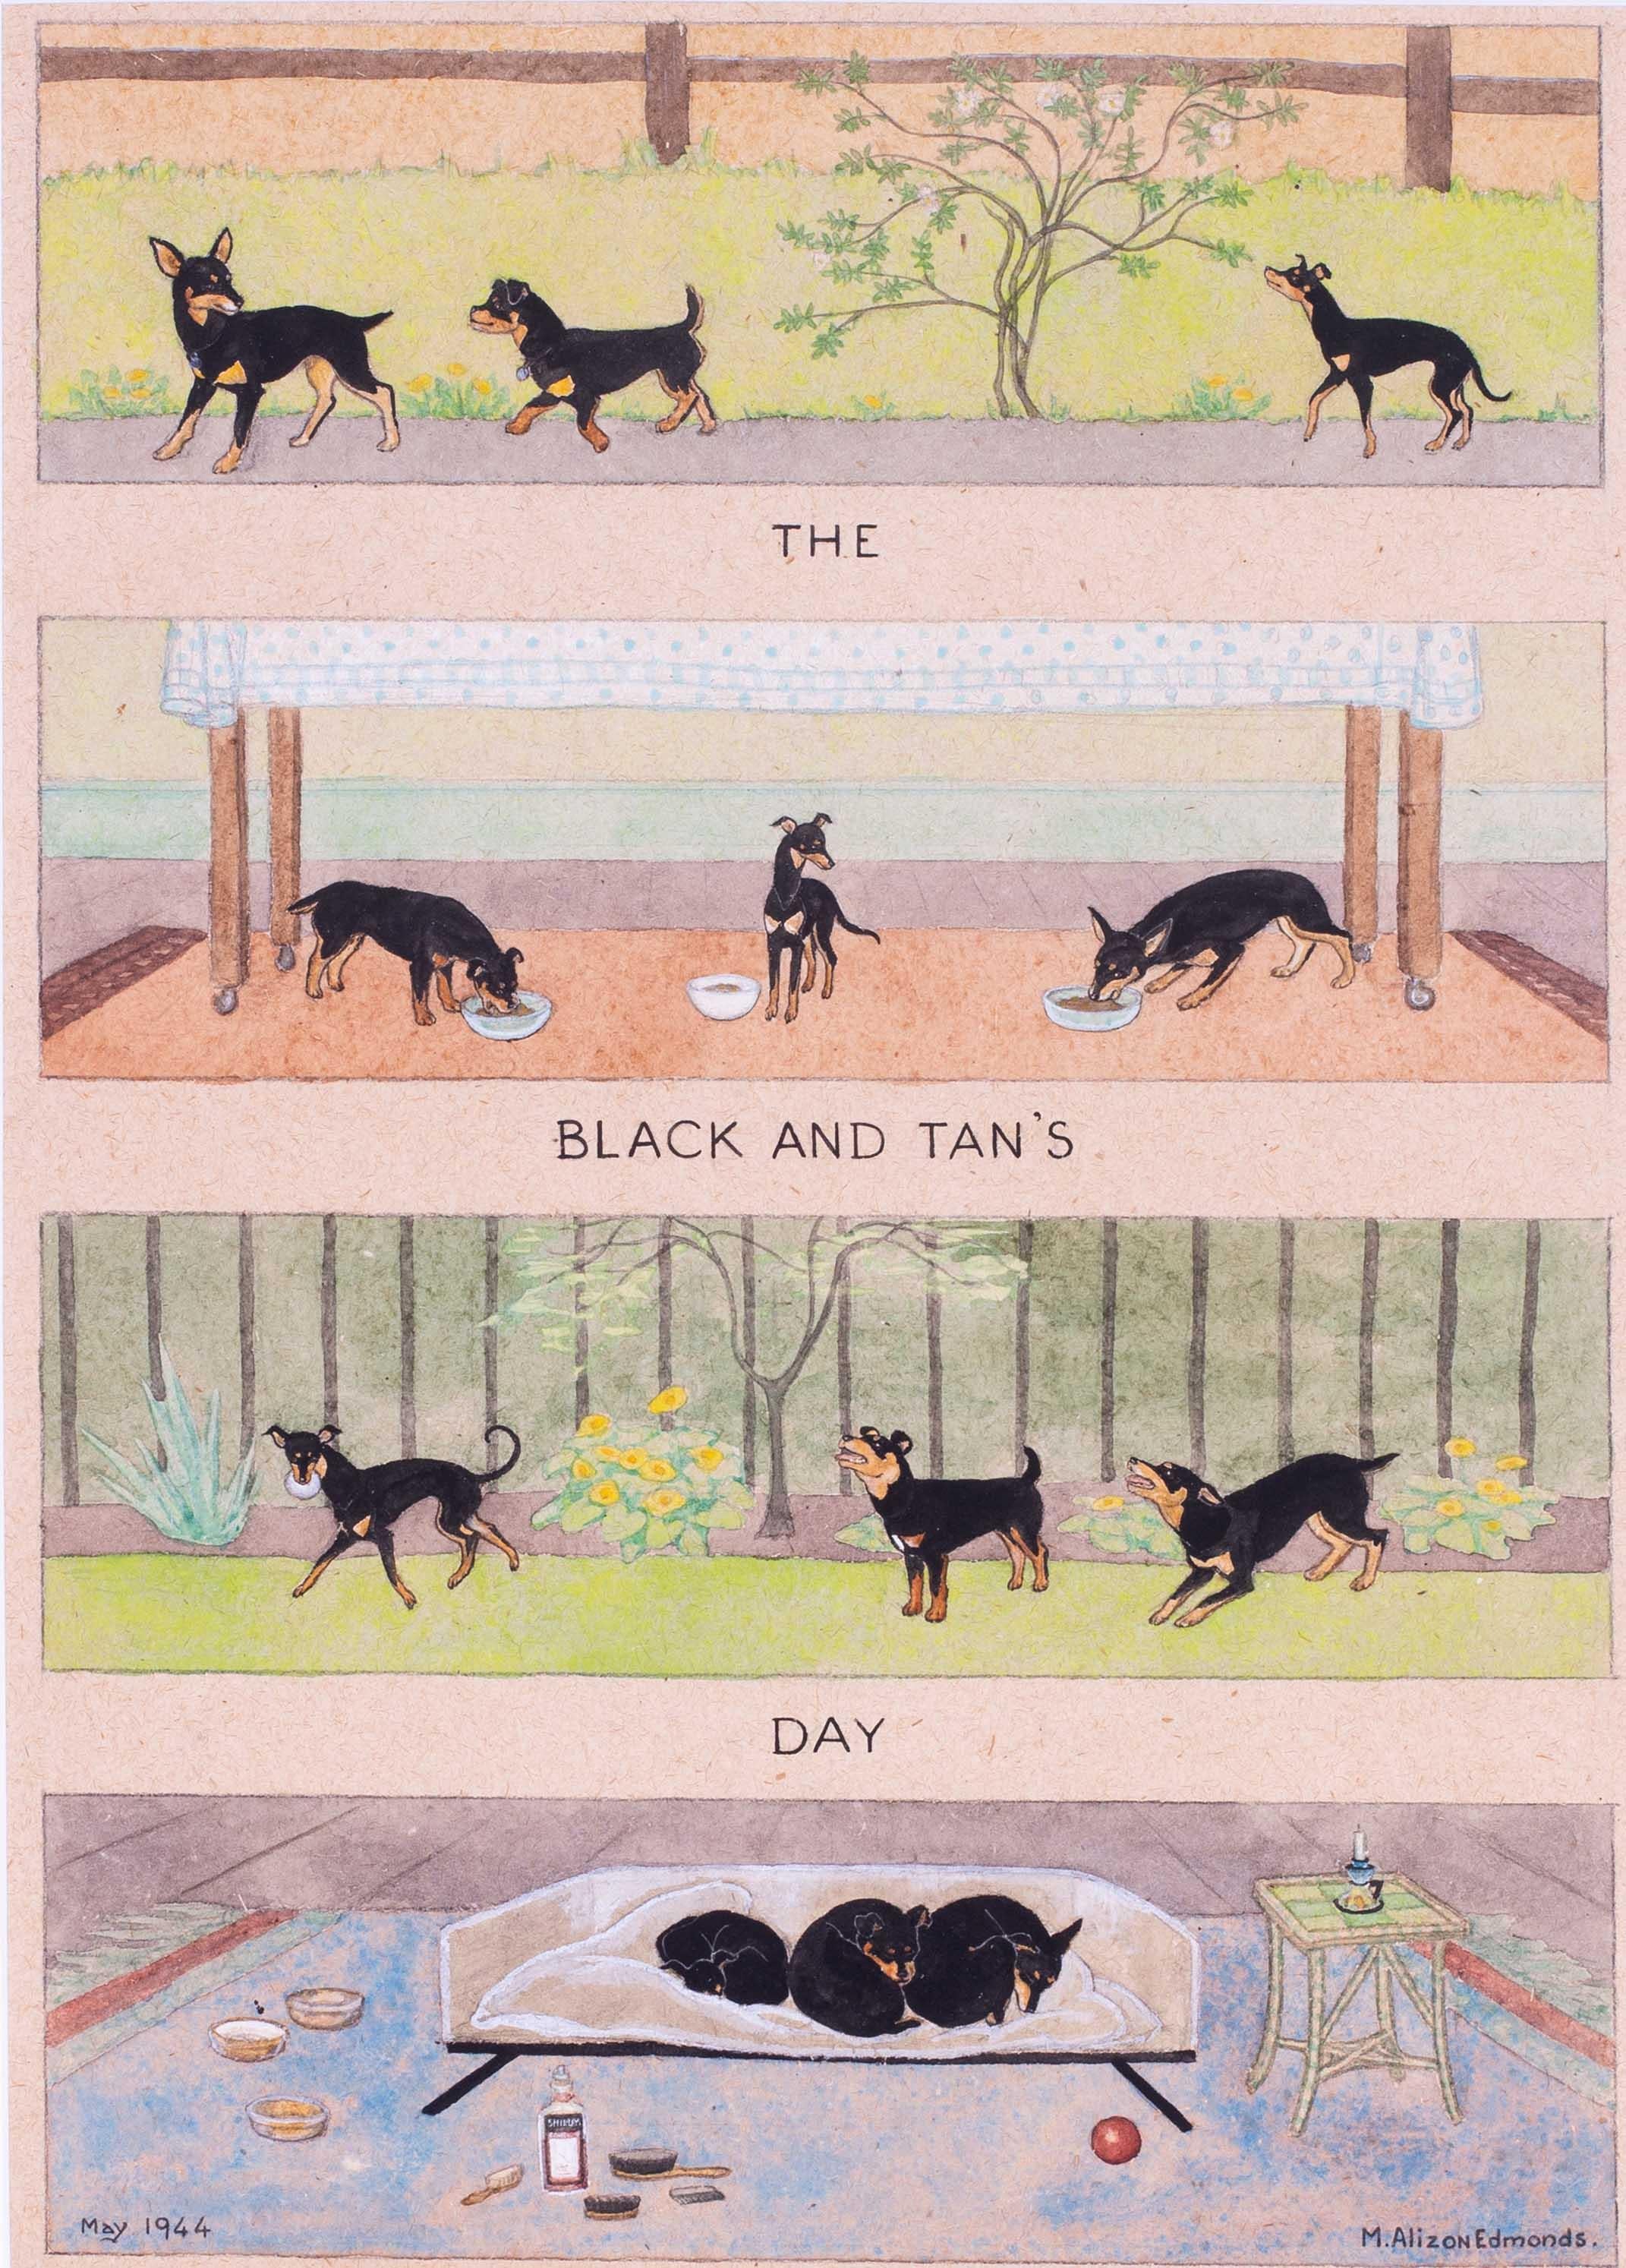 British mid century watercolour and pen drawing of black and tan terrier dogs - Art by Mona Alizon Edmonds